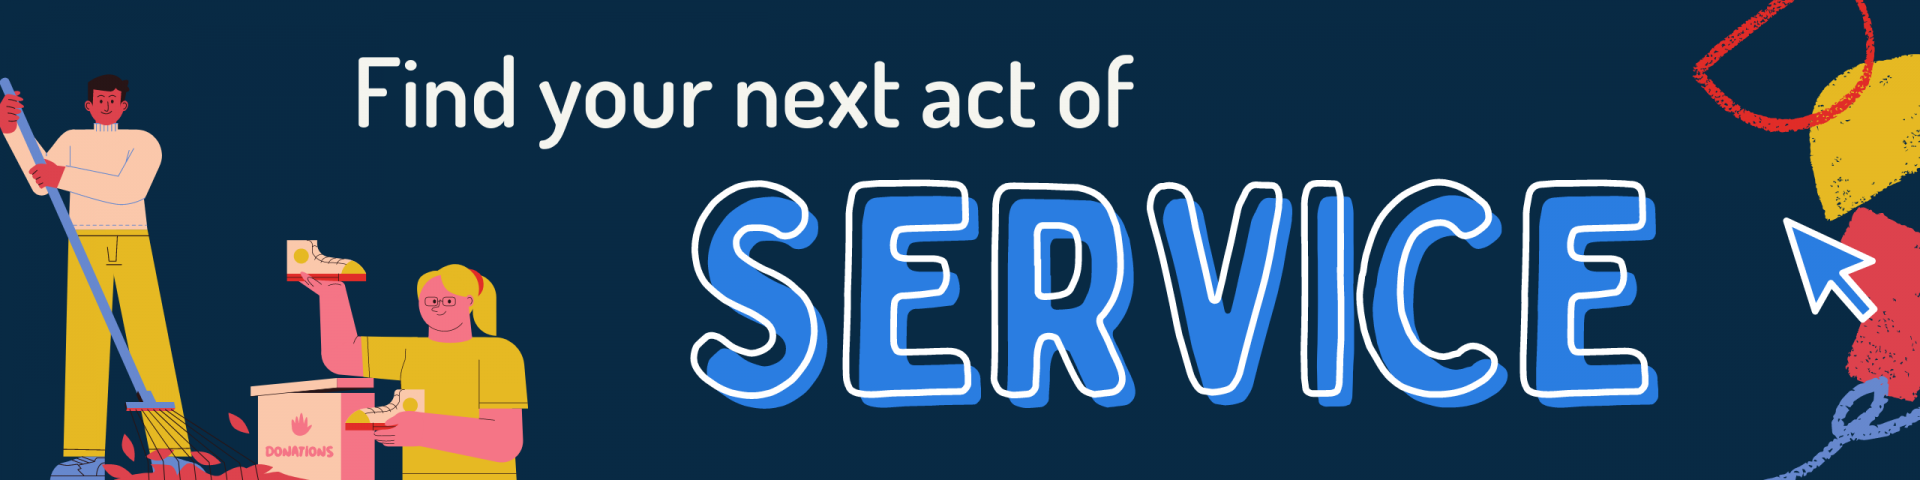 Find your next act of service